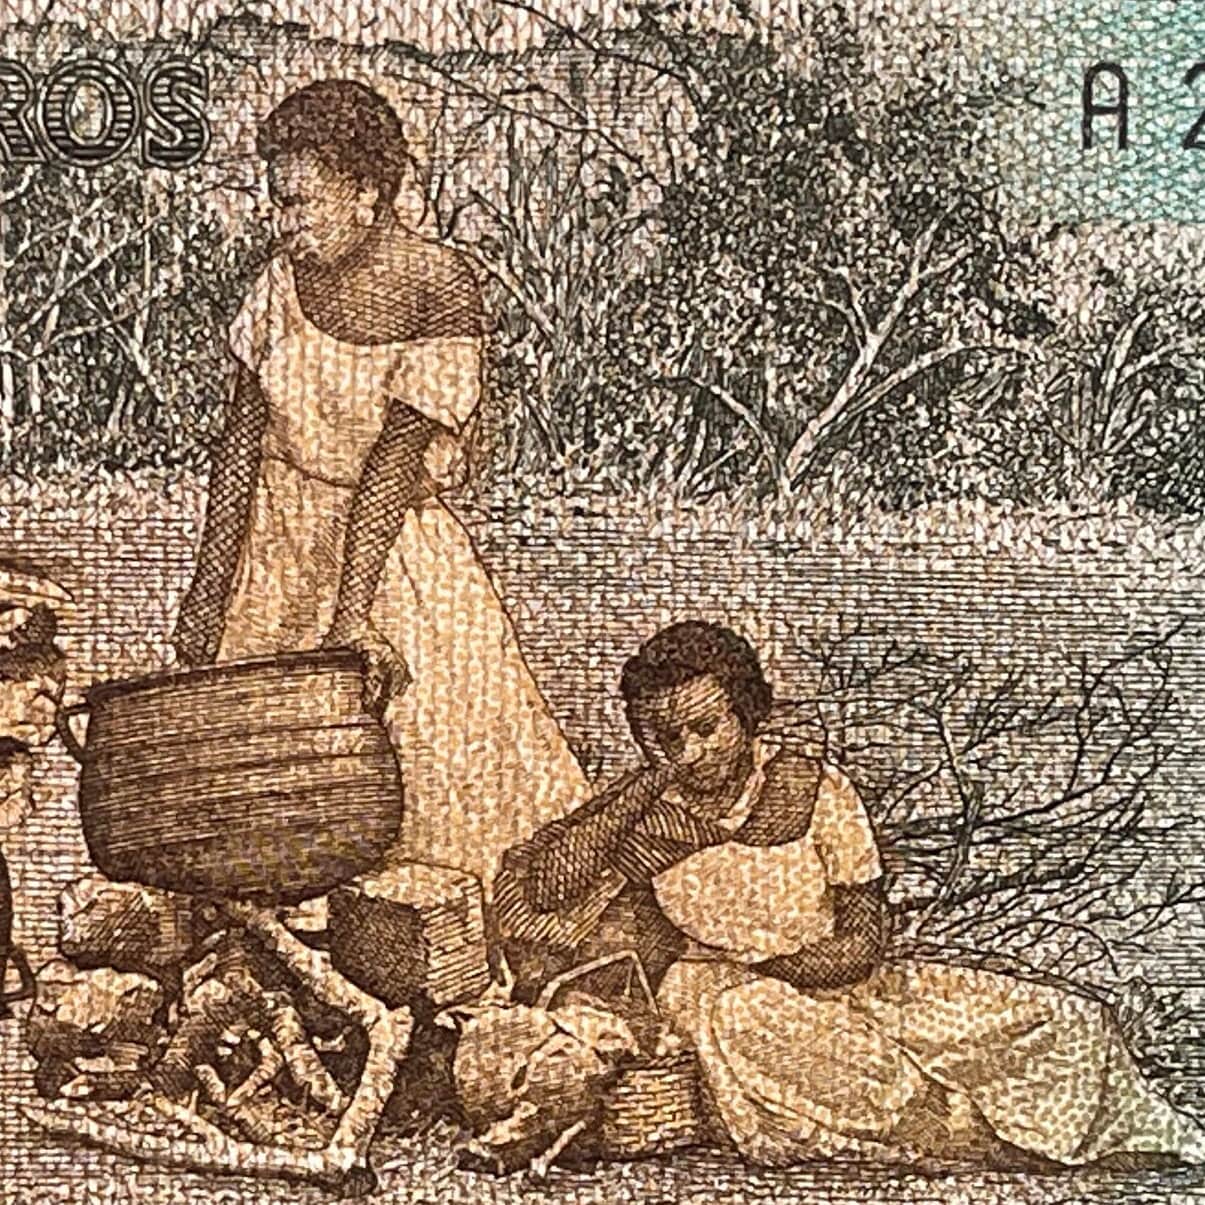 The Redemptress, Isabel, Princess Imperial & Freed Slaves 200 Cruzieros Brazil Authentic Banknote Money for Collage (Abolition) (Golden Law)